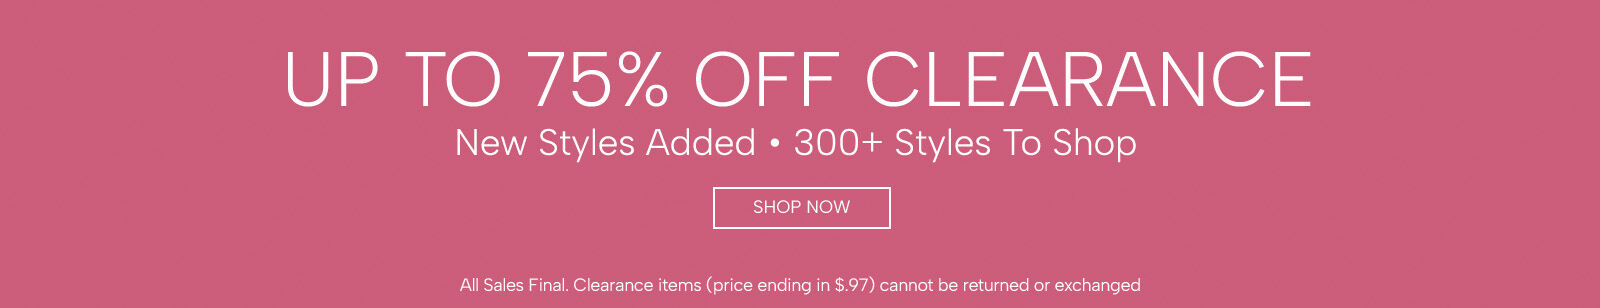 up to 75% off clearance new styles added. 300+ styles to shop shop now all sales final. clearance items (price ending in $.97) cannot be returned or exchanged